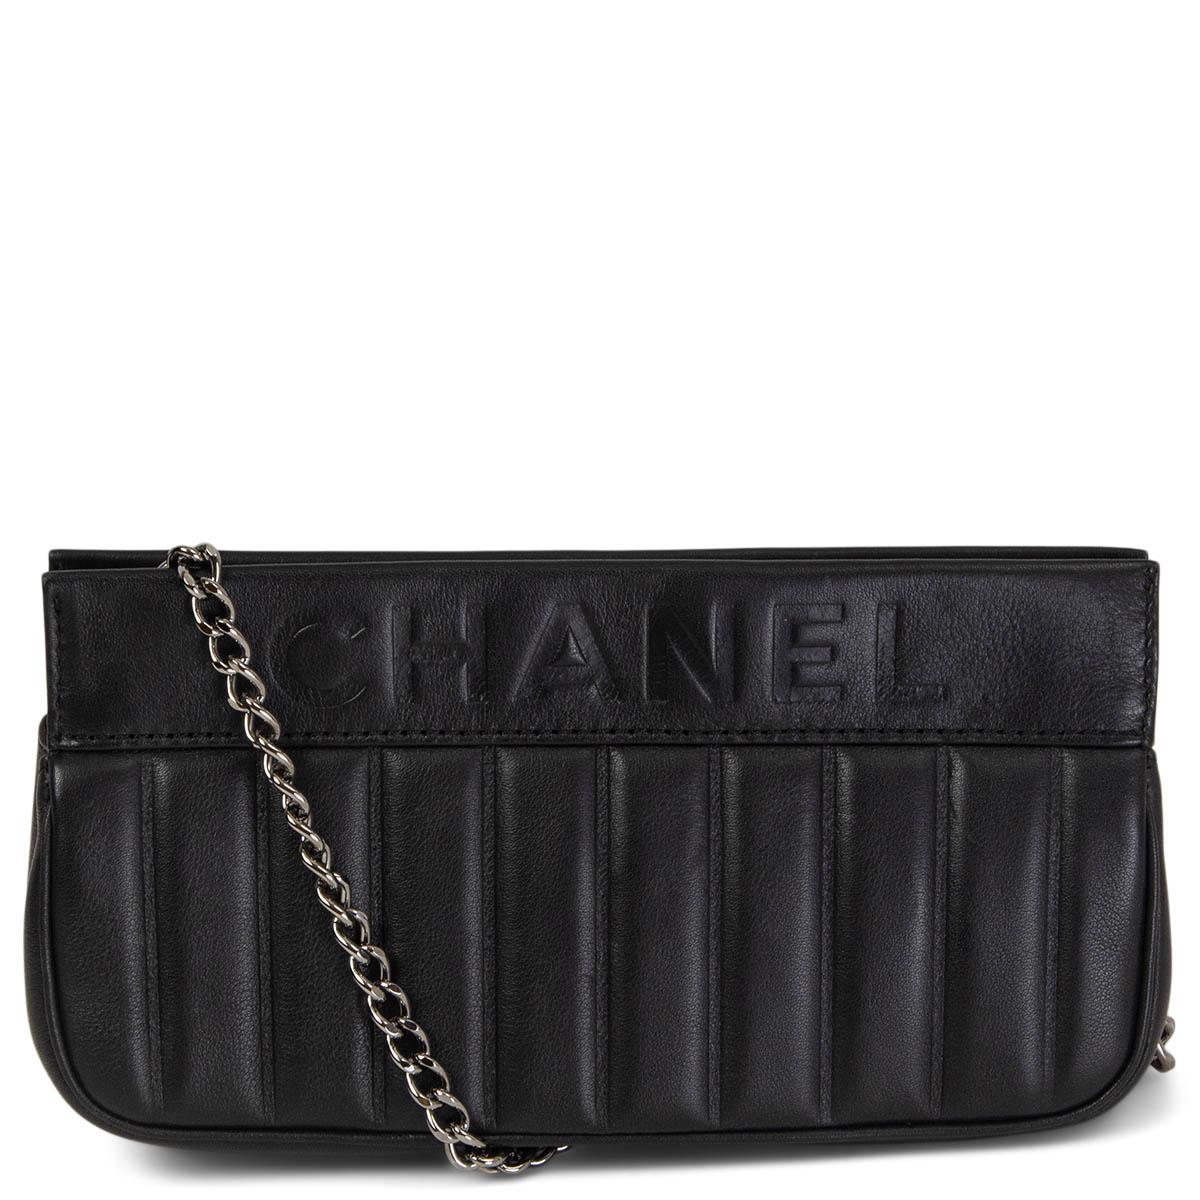 CHANEL black leather LAX SMALL VERTICAL QUILTE Clutch Shoulder Bag For Sale